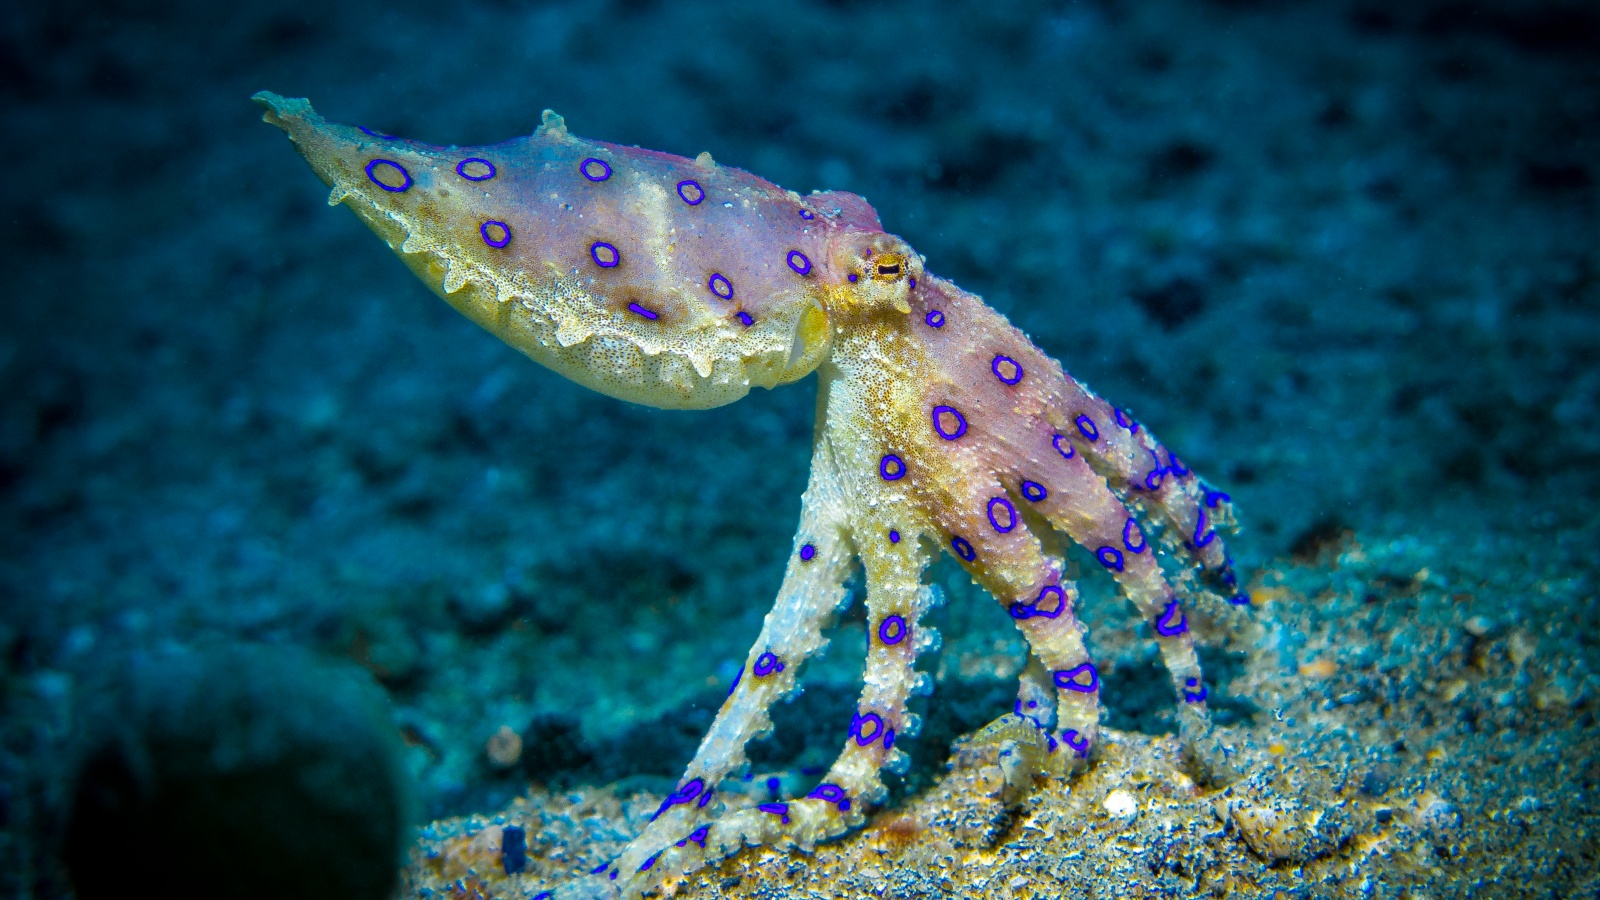 A yellow octopus with blue rings on its body sitting on the seafloor